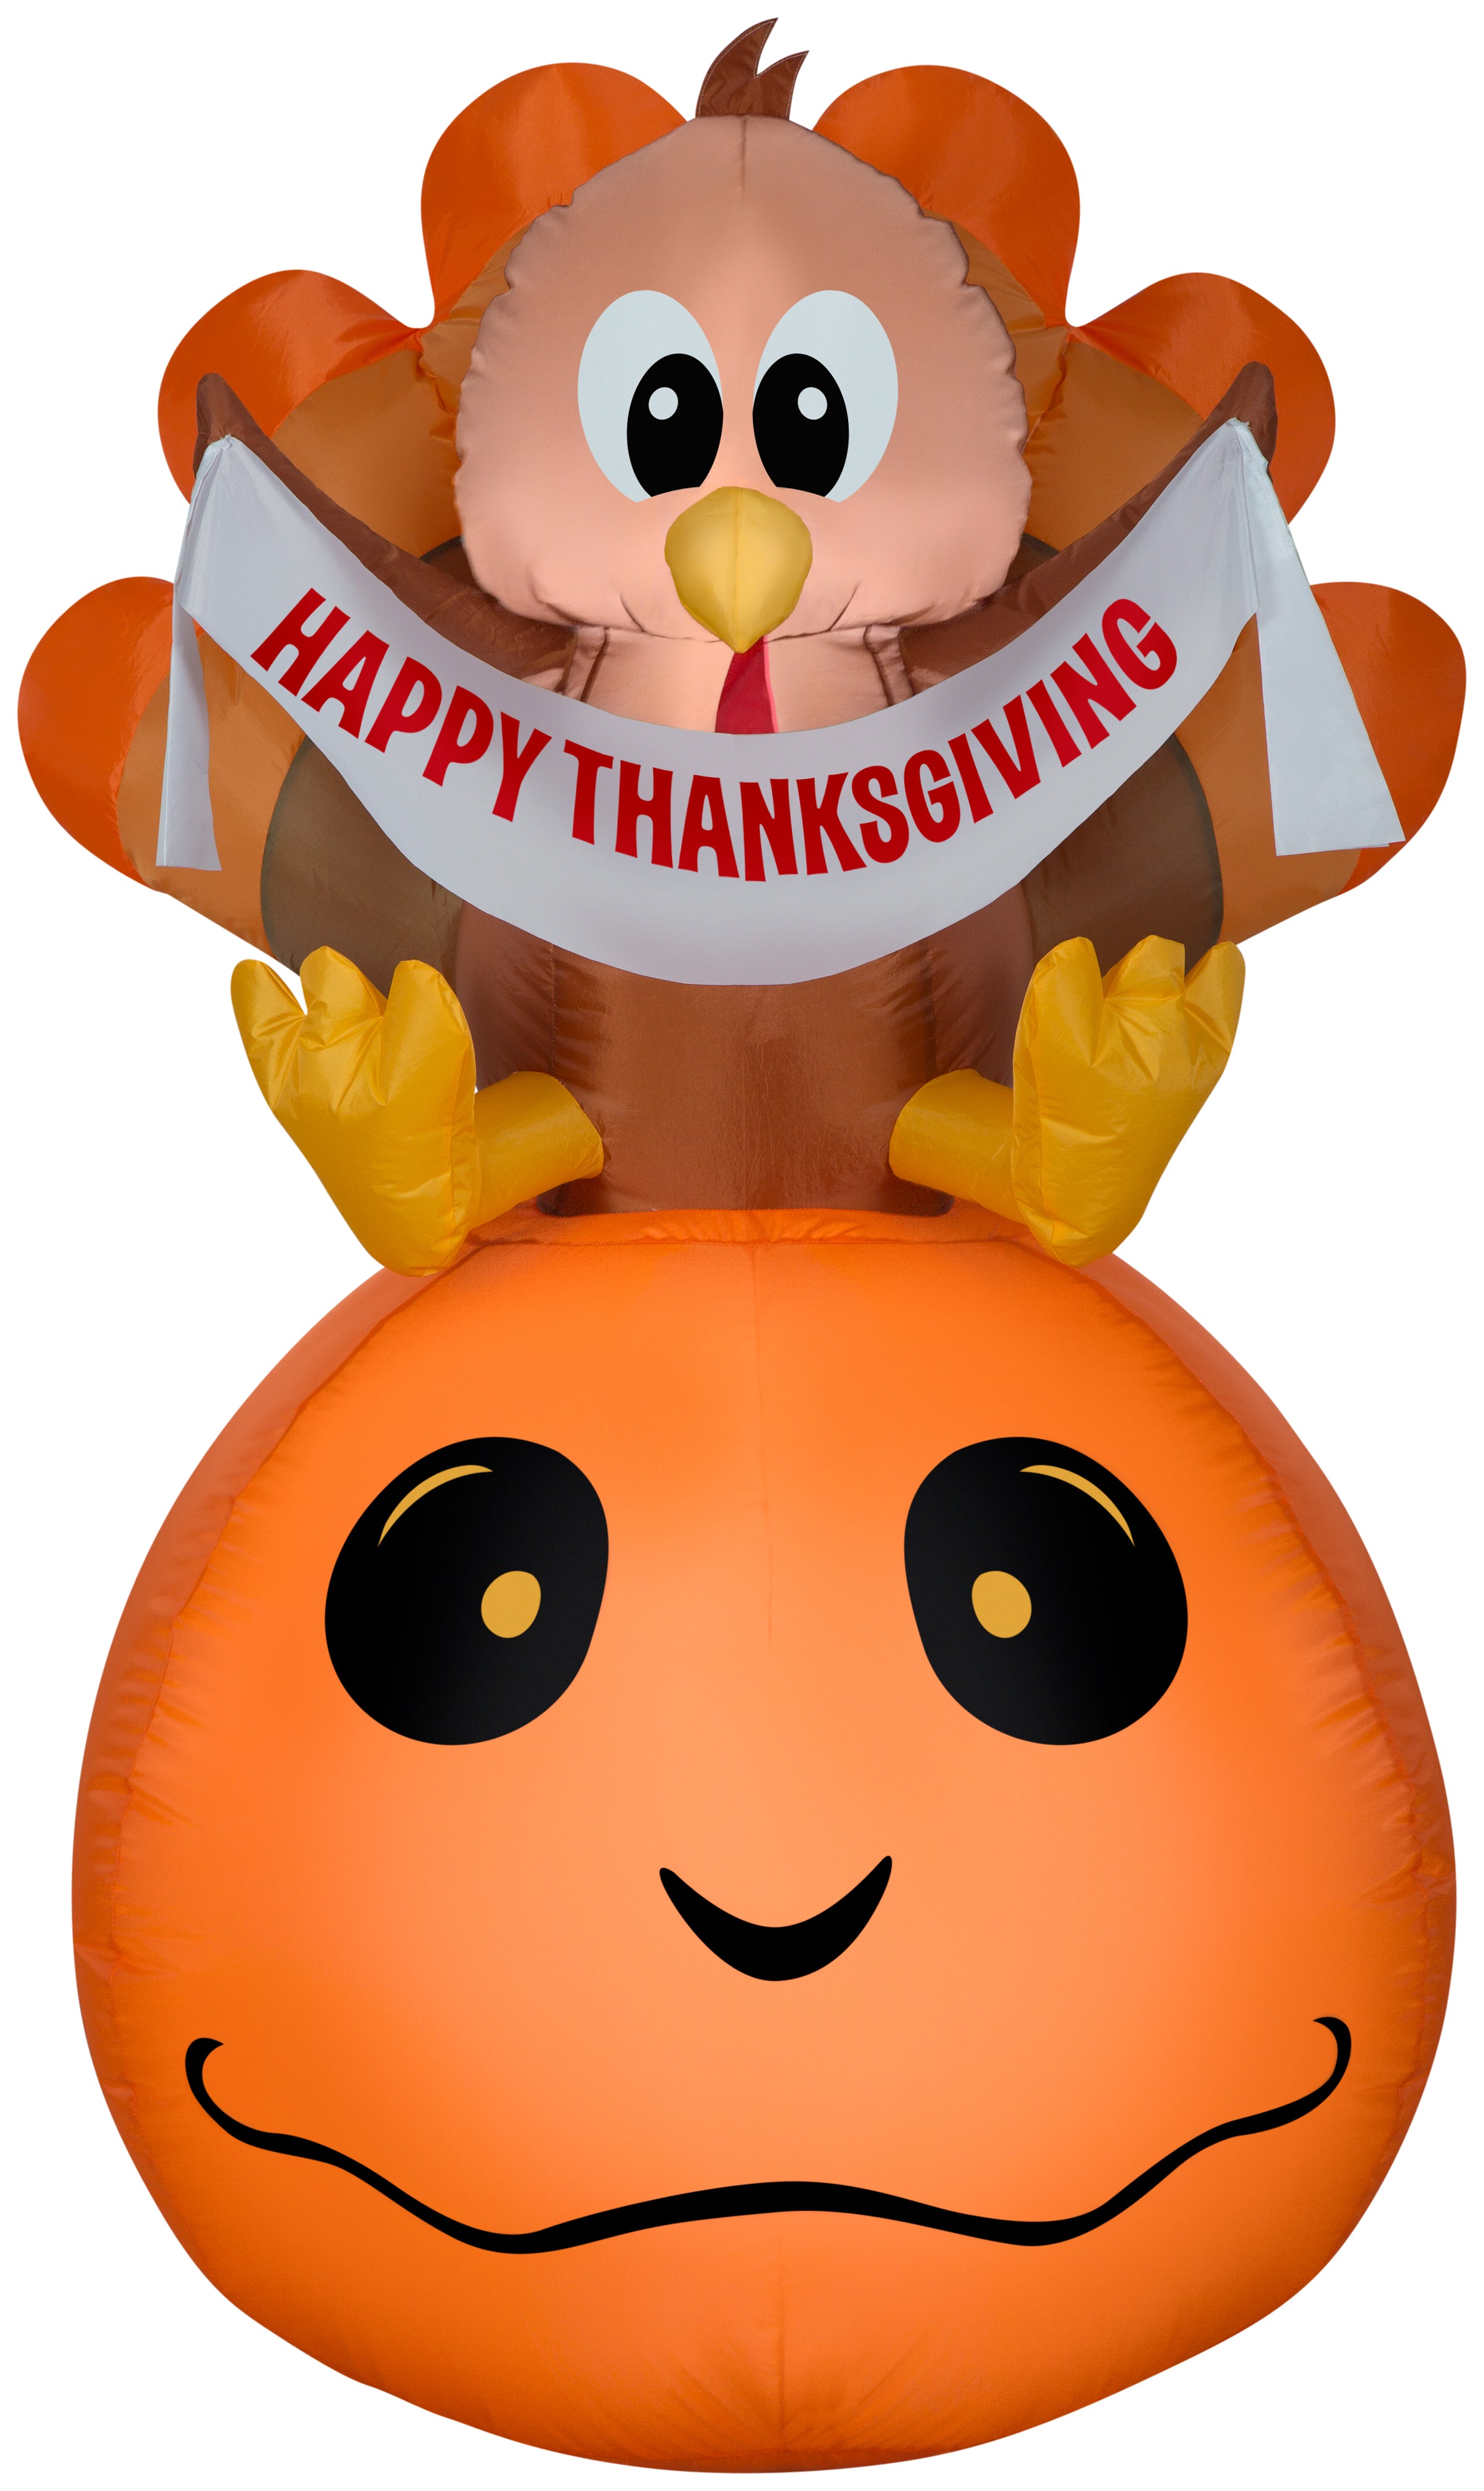 Gemmy Airblown Inflatable Pumpkin and Turkey with Happy Thanksgiving Banner, 4.5 ft Tall, Orange